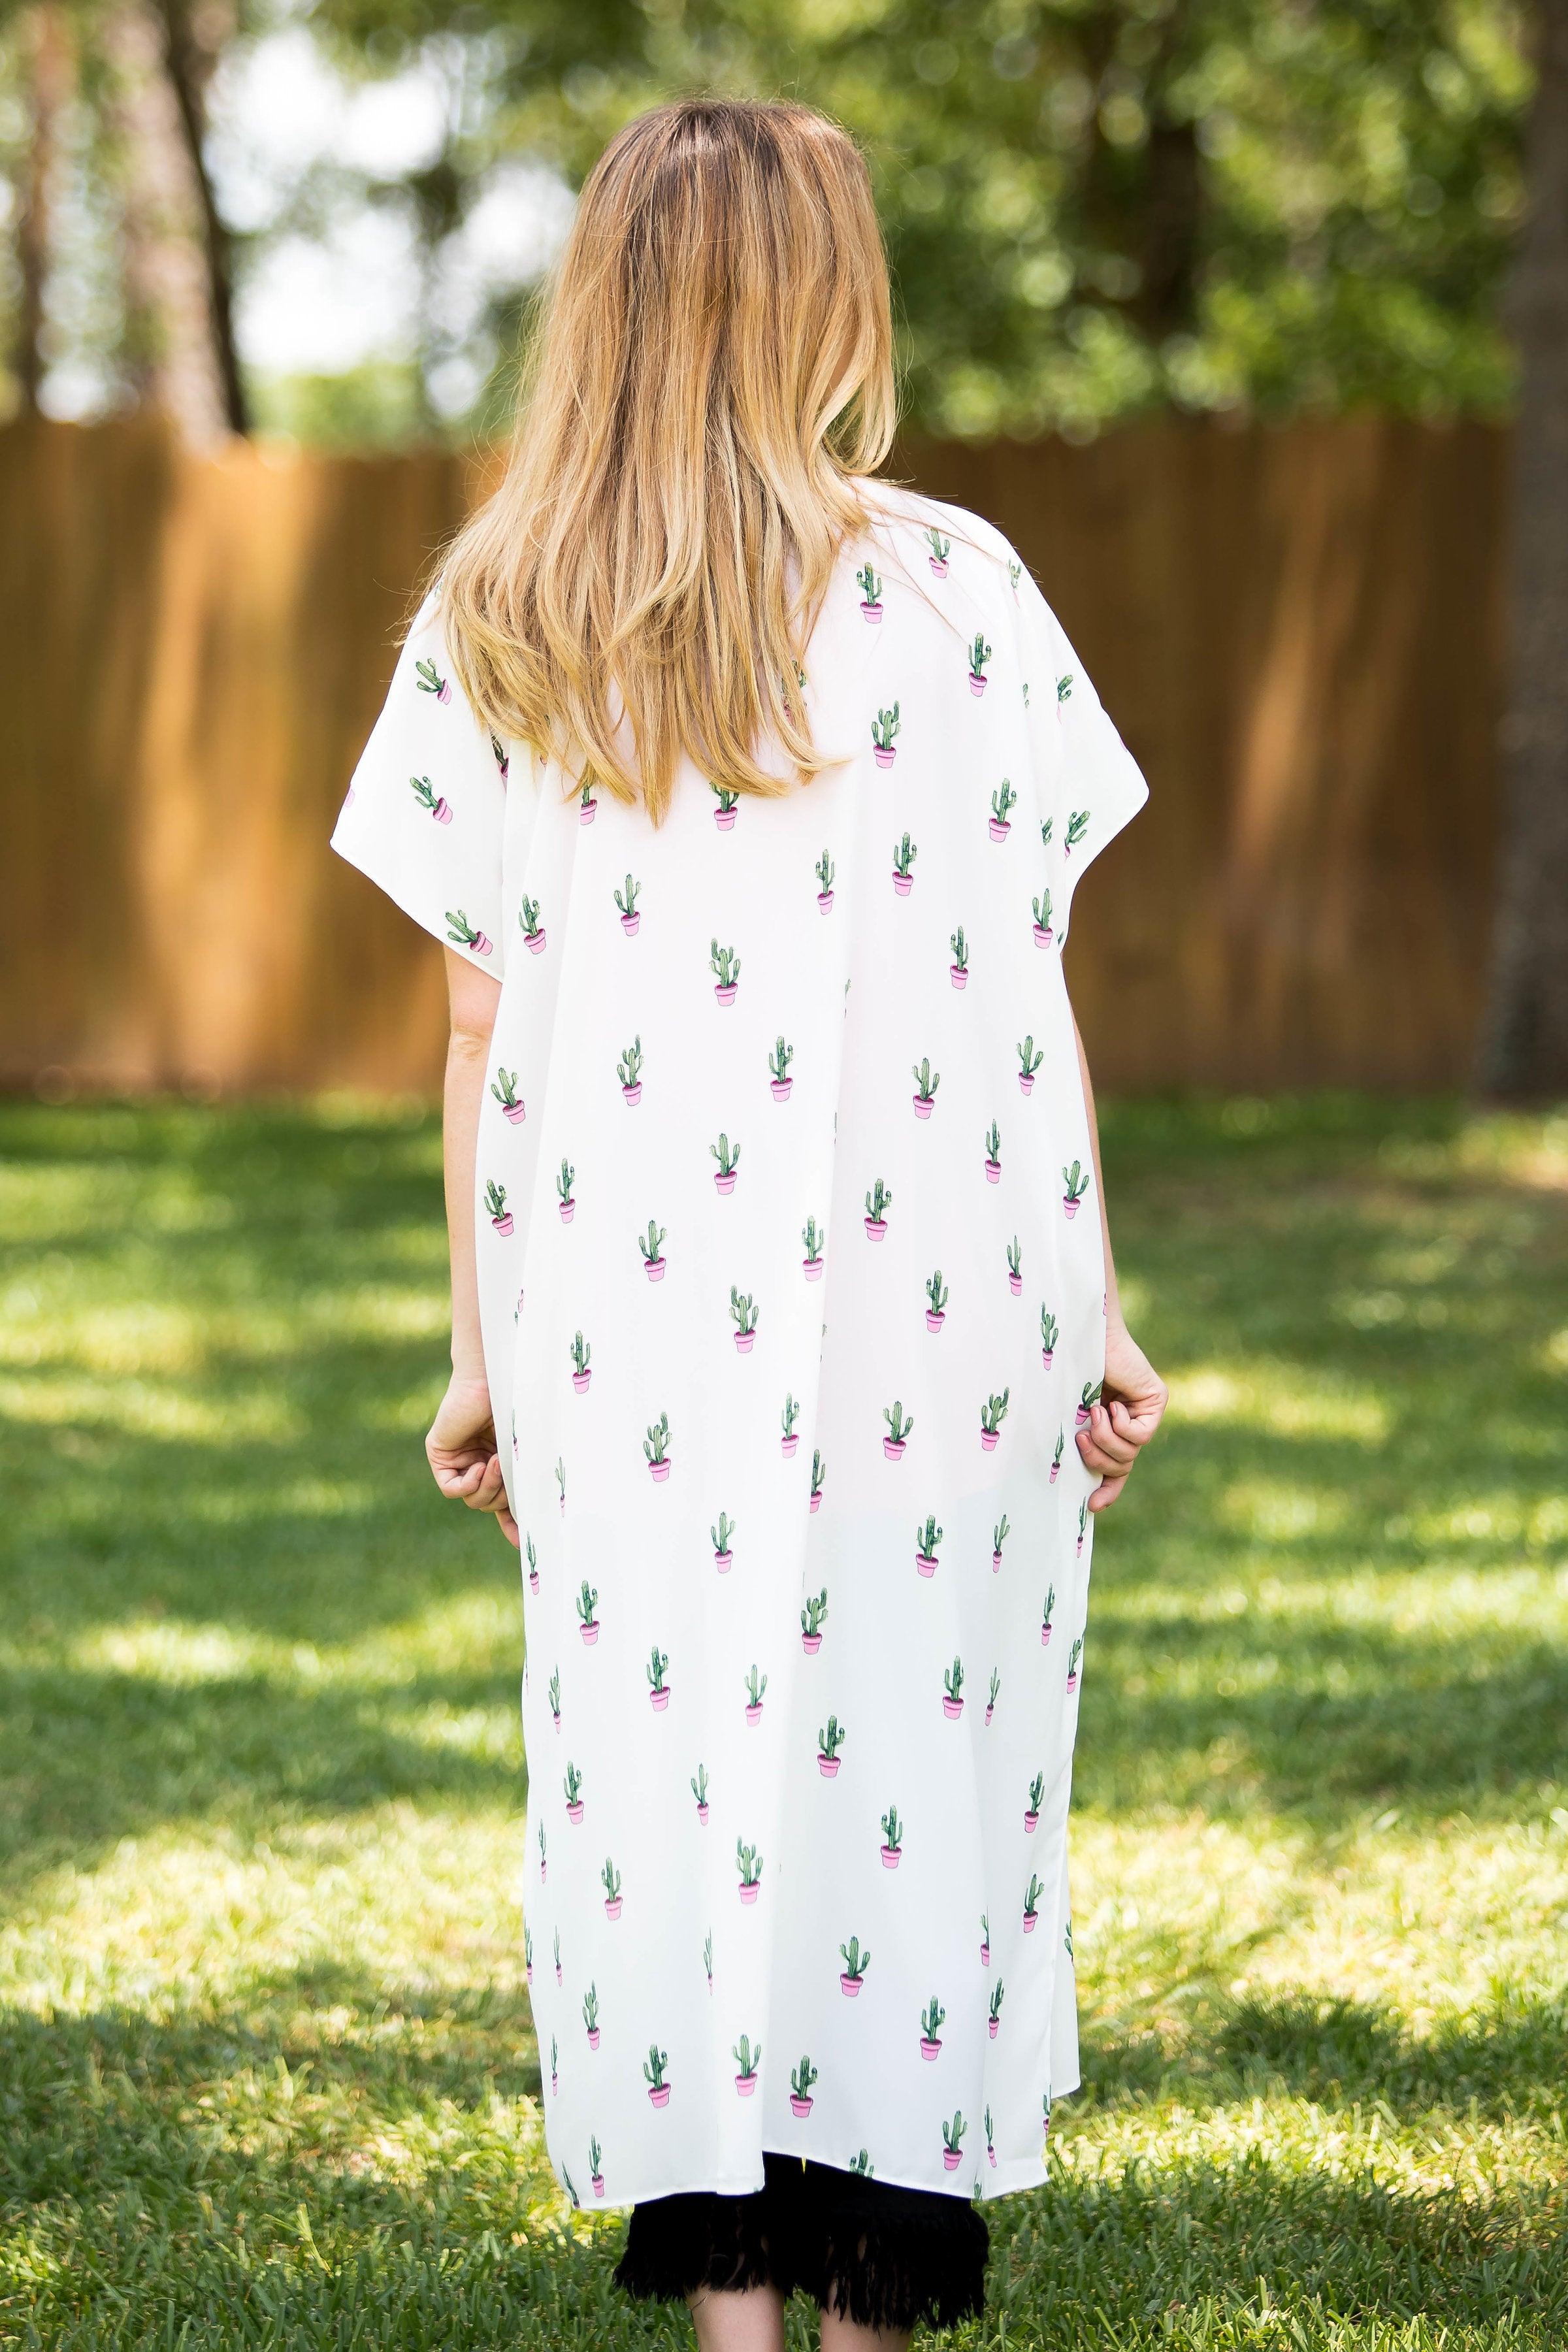 Cactus Clothing | Cactus Print Clothes | Desert Rose Collection